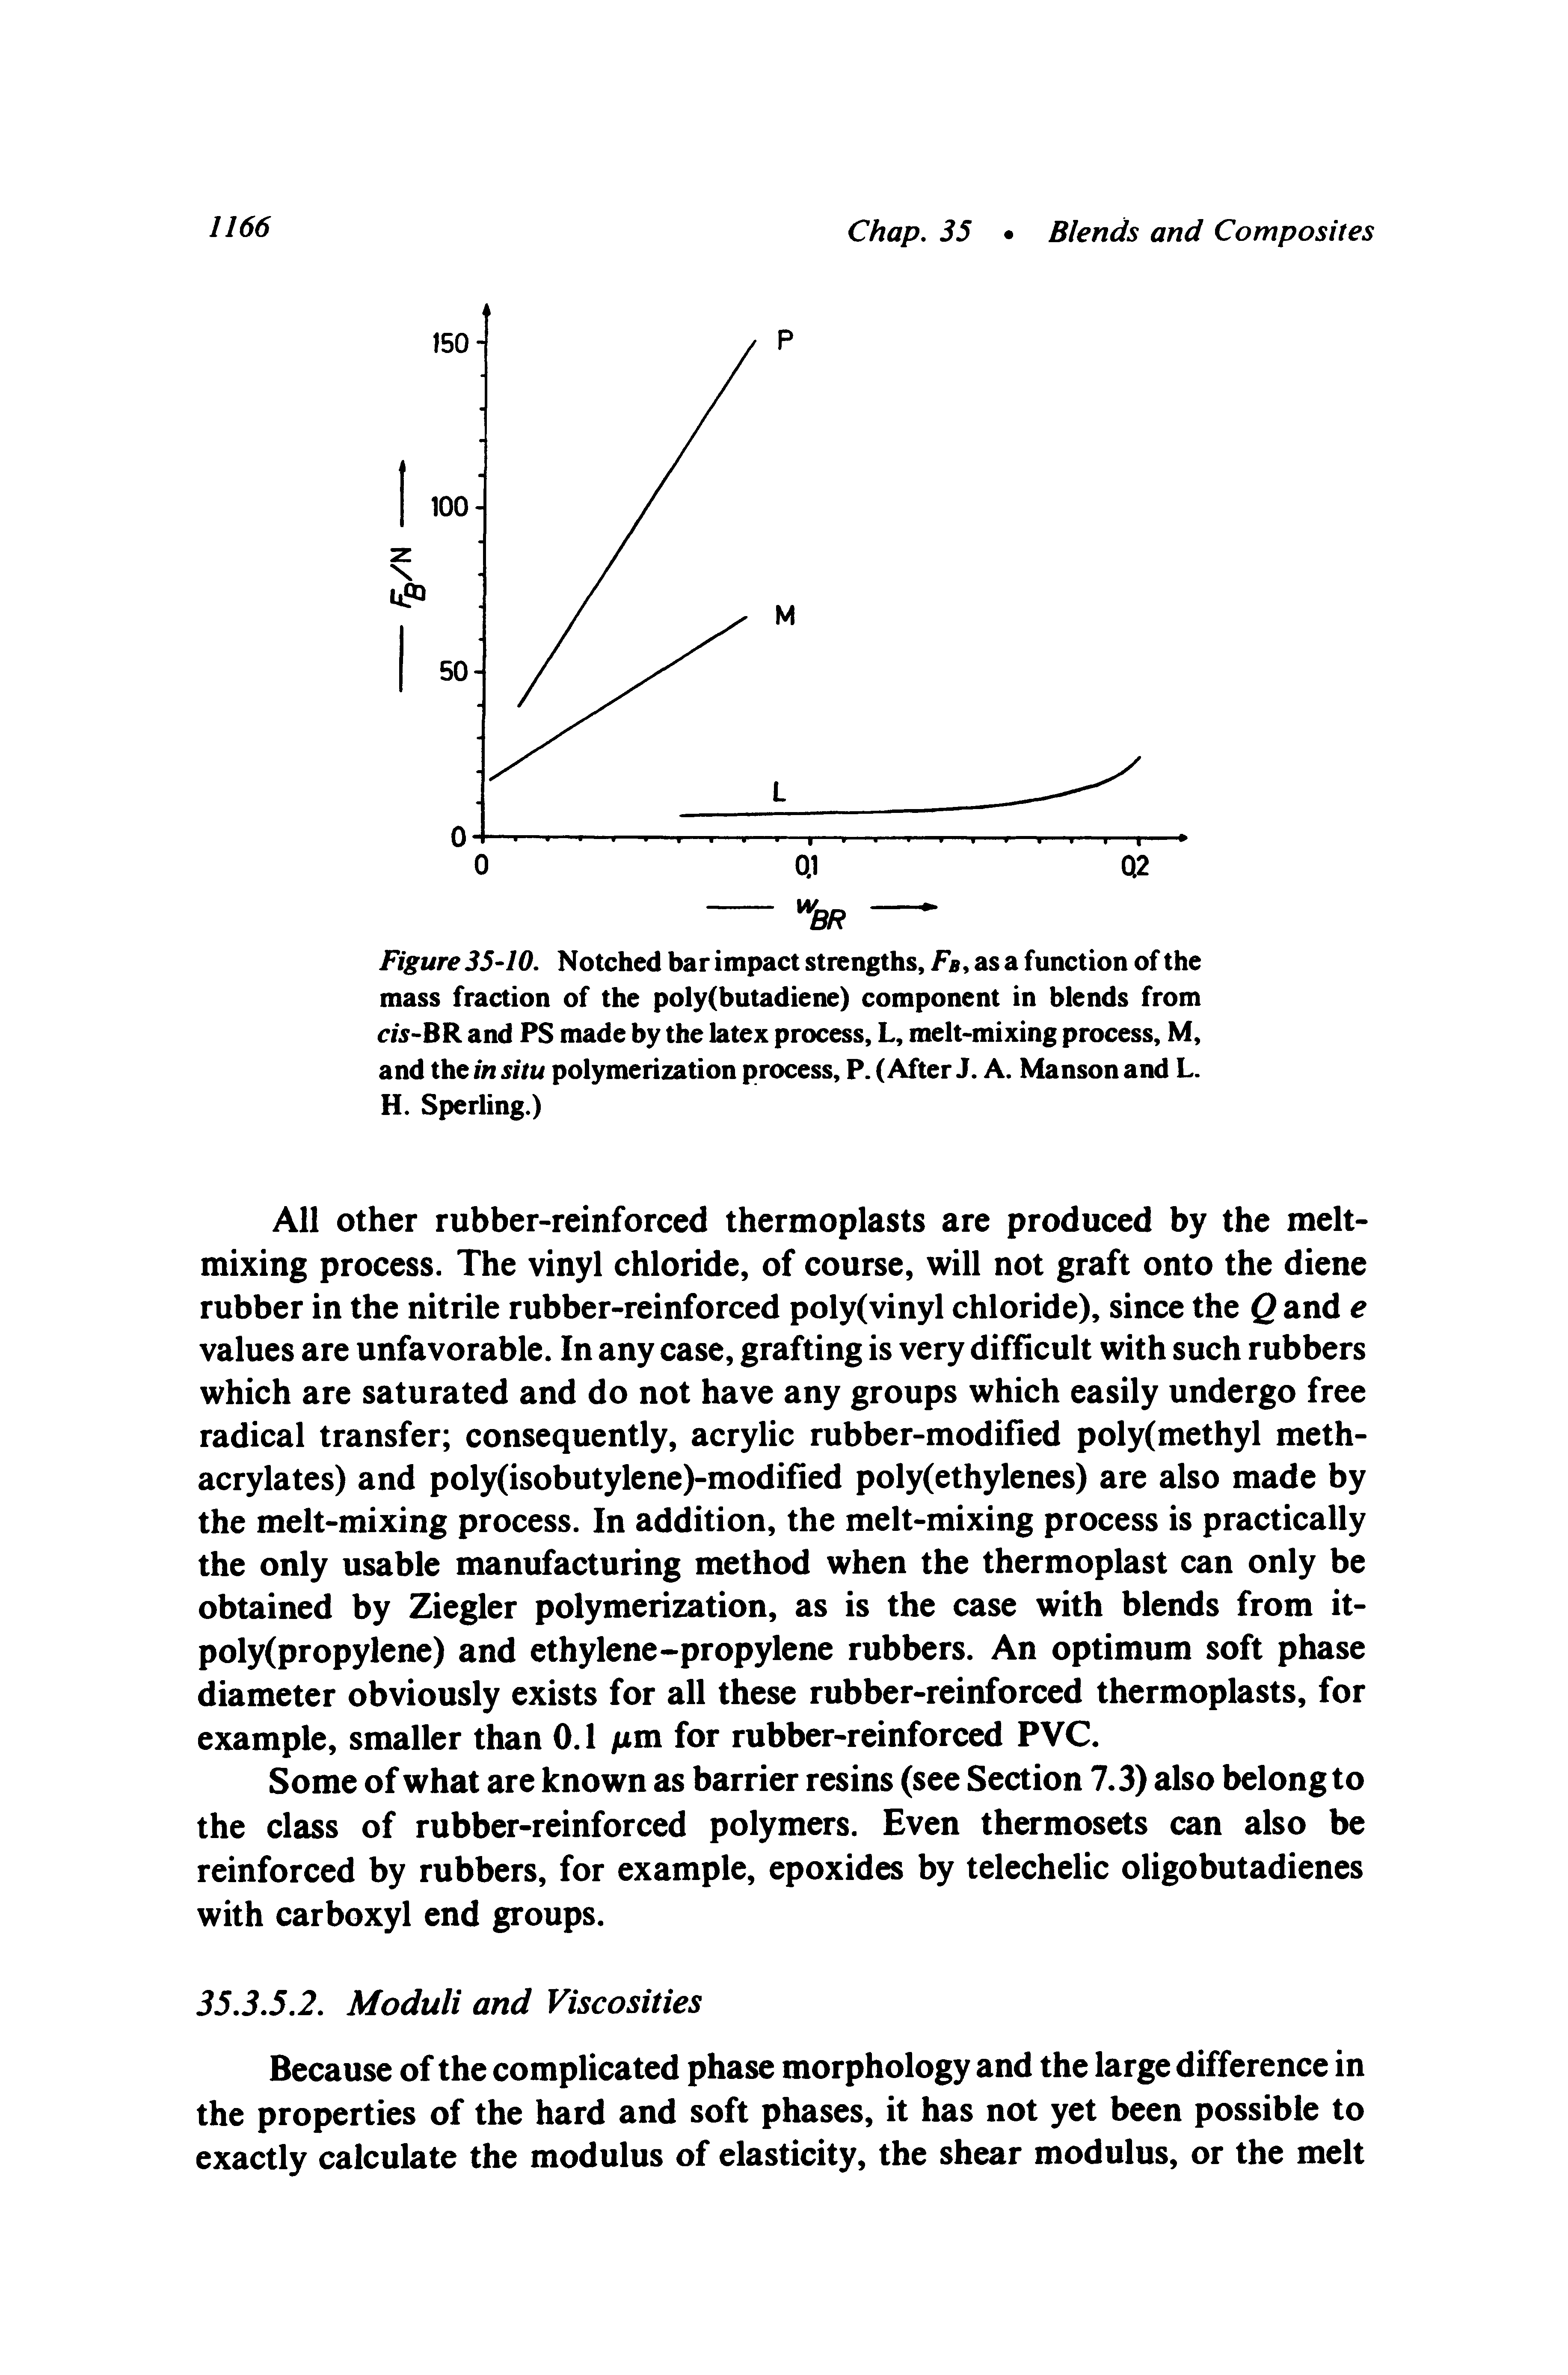 Figure 35-10. Notched bar impact strengths, as a function of the mass fraction of the poly(butadiene) component in blends from cis-BR and PS made by the latex process, L, melt-mixing process, M, and the in situ polymerization process, P. (After J. A. Manson and L. H. Sperling.)...